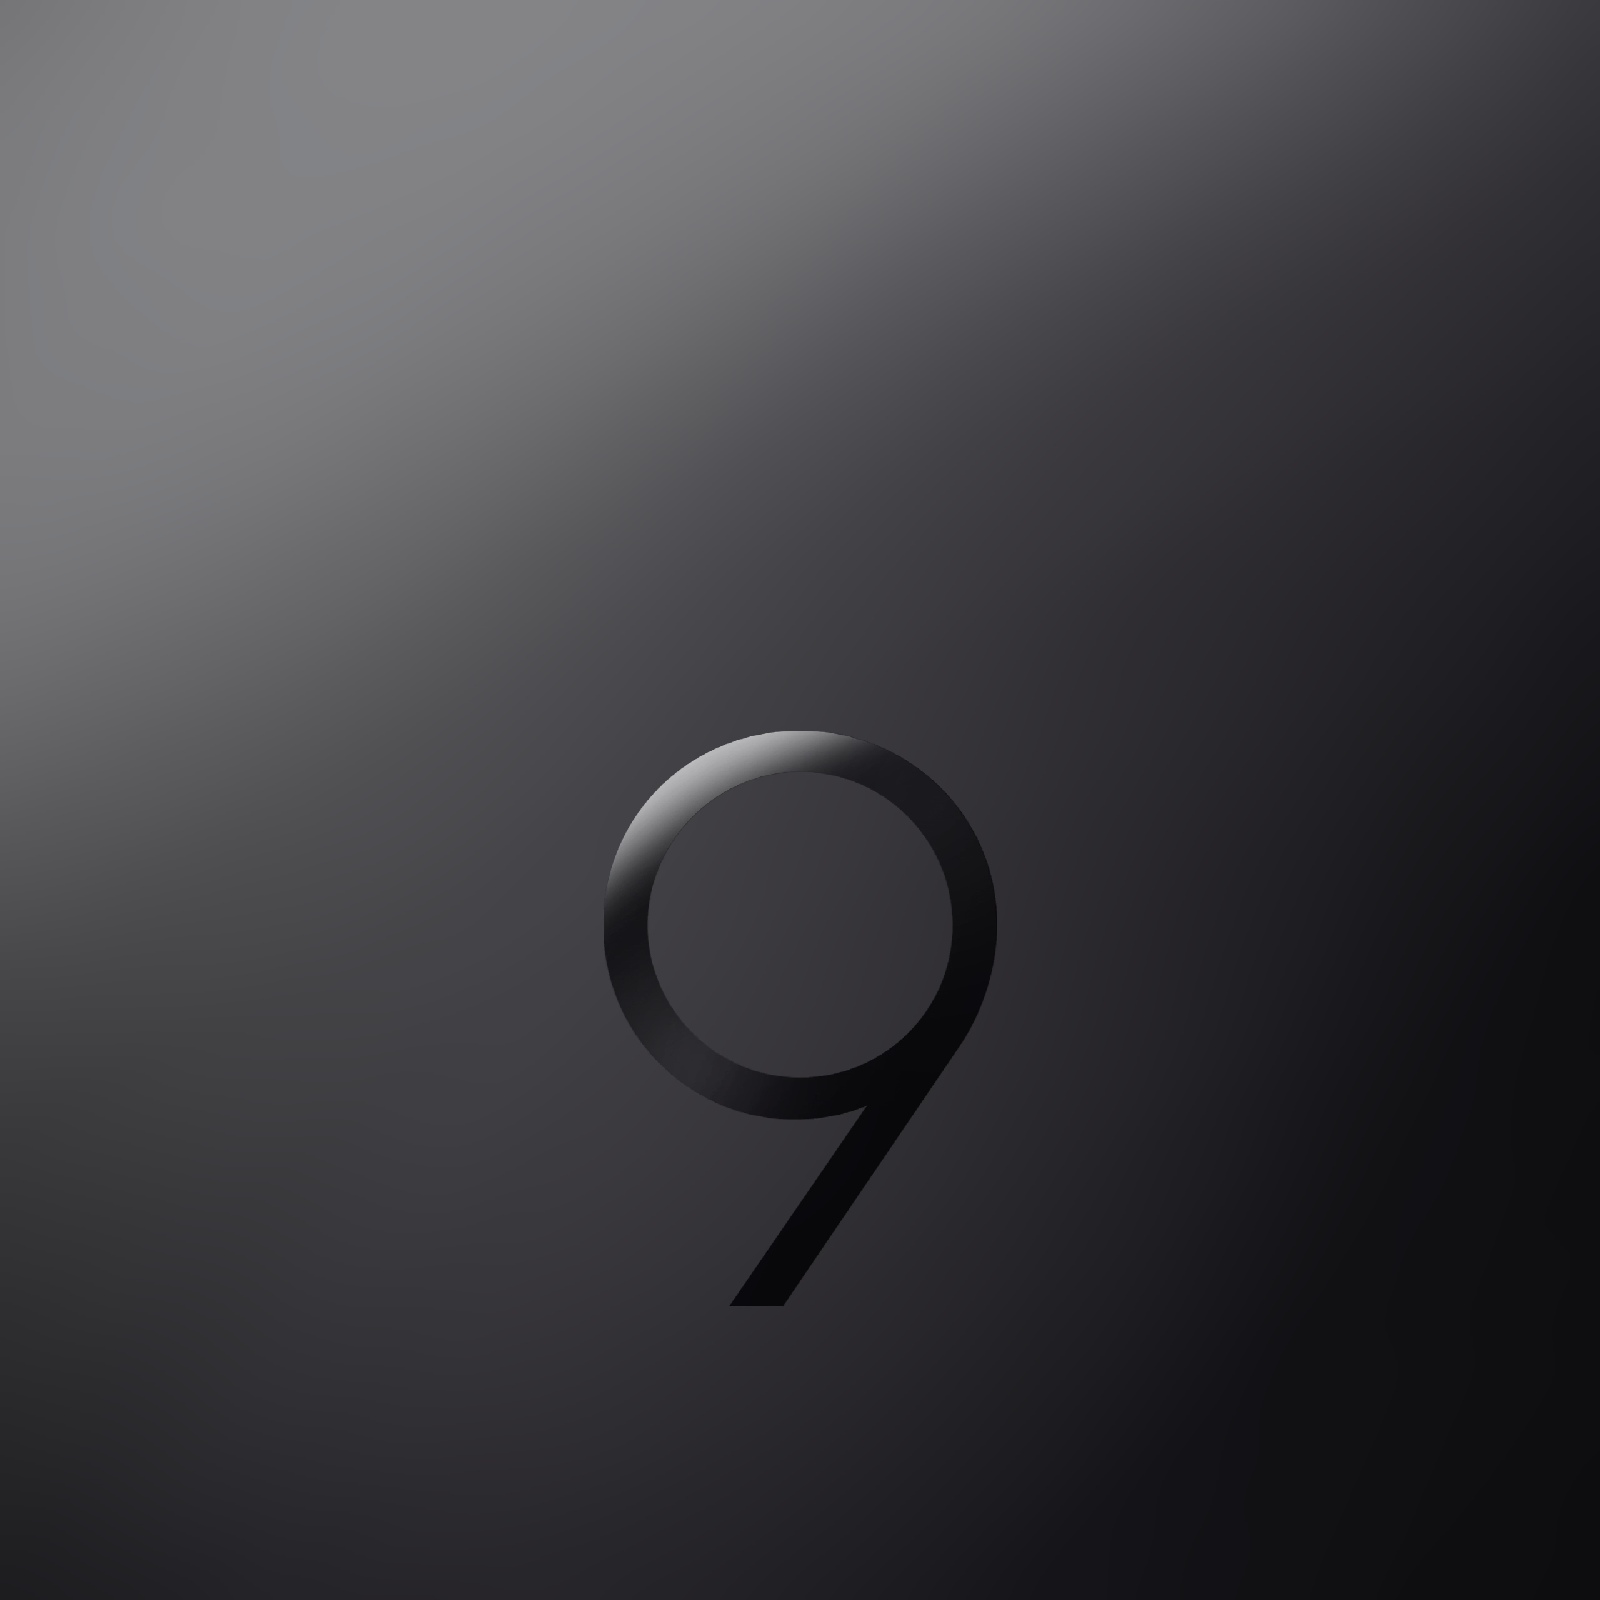 Official Galaxy S9 wallpapers are